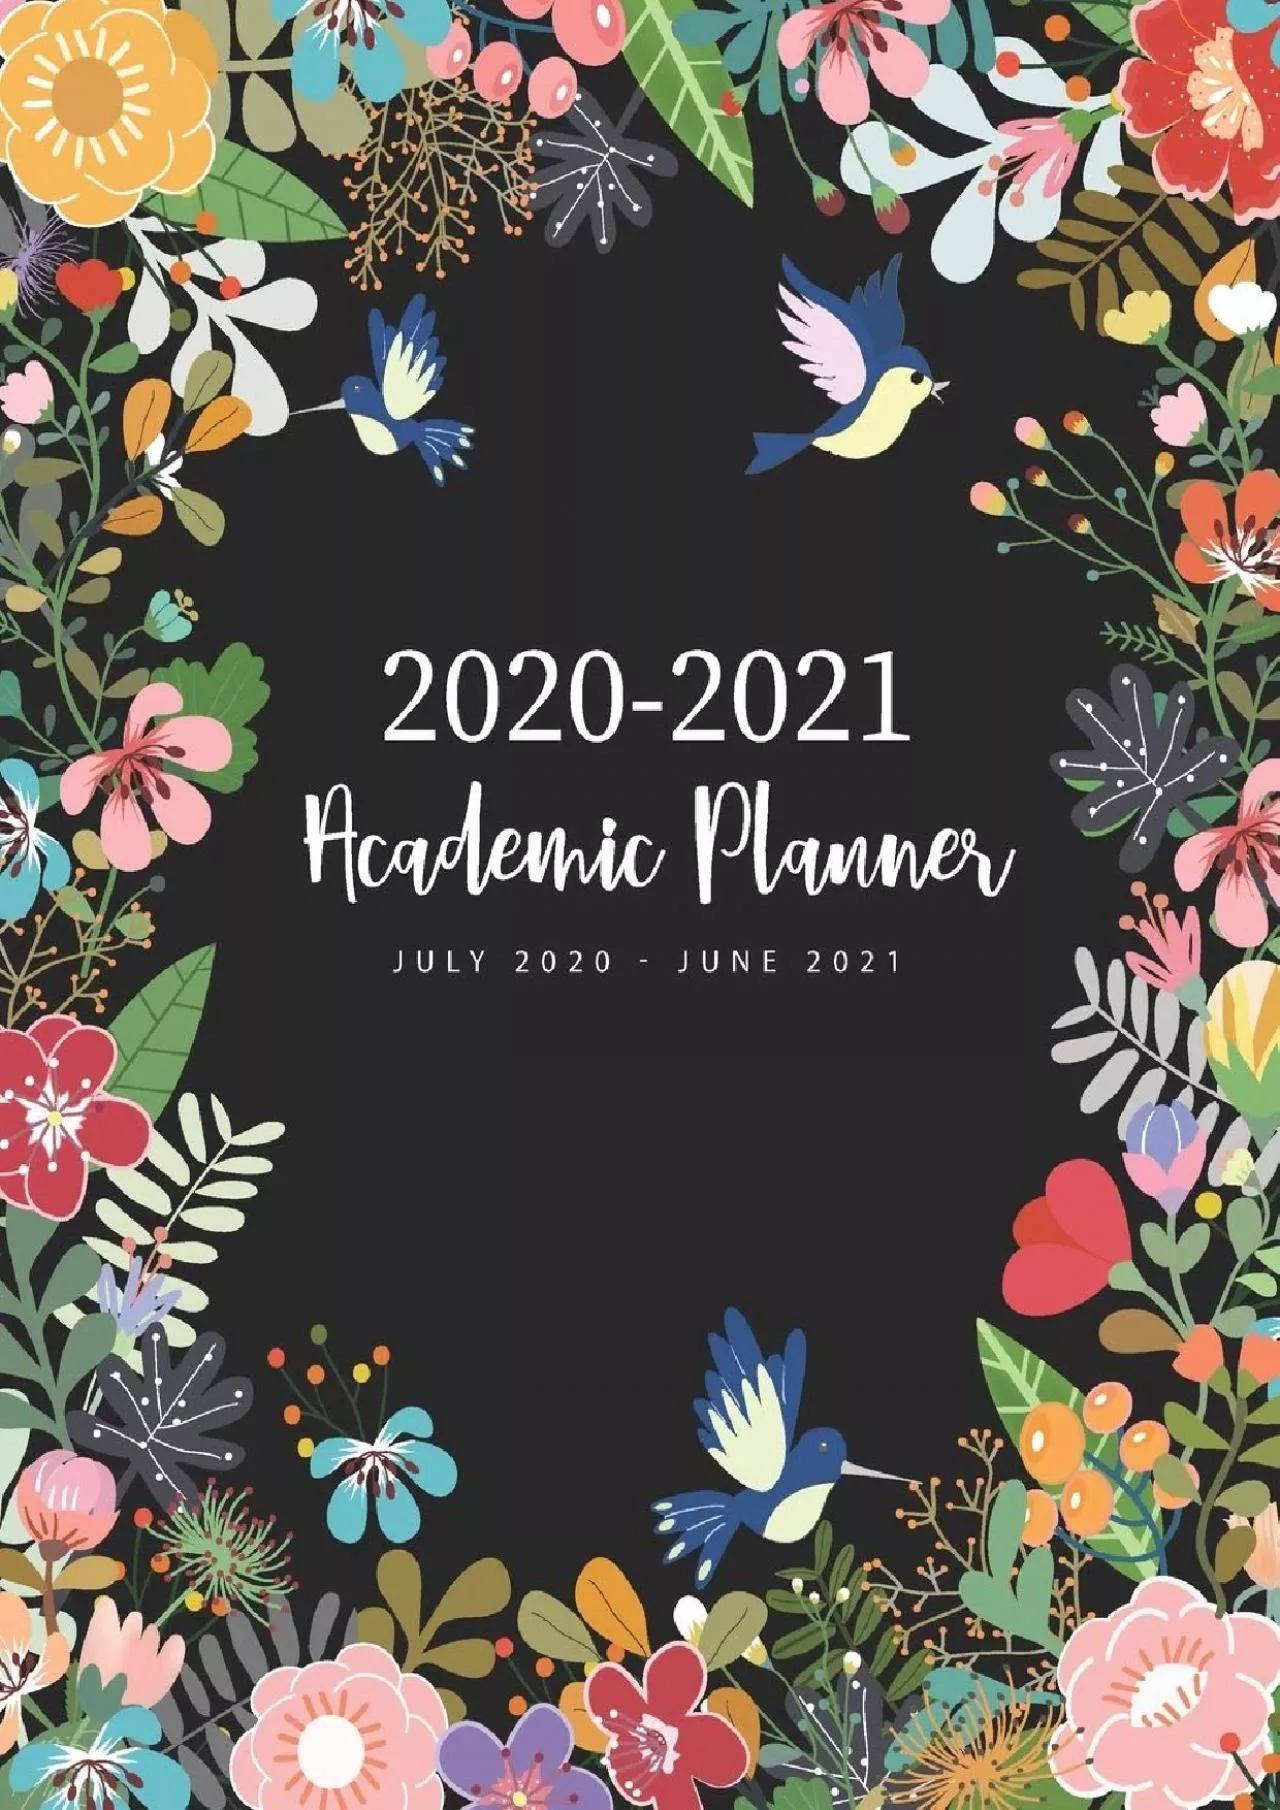 [READ] 2020-2021 Academic Planner July 2020-June 2021: Bird Floral Cover | 2020-2021 Academic